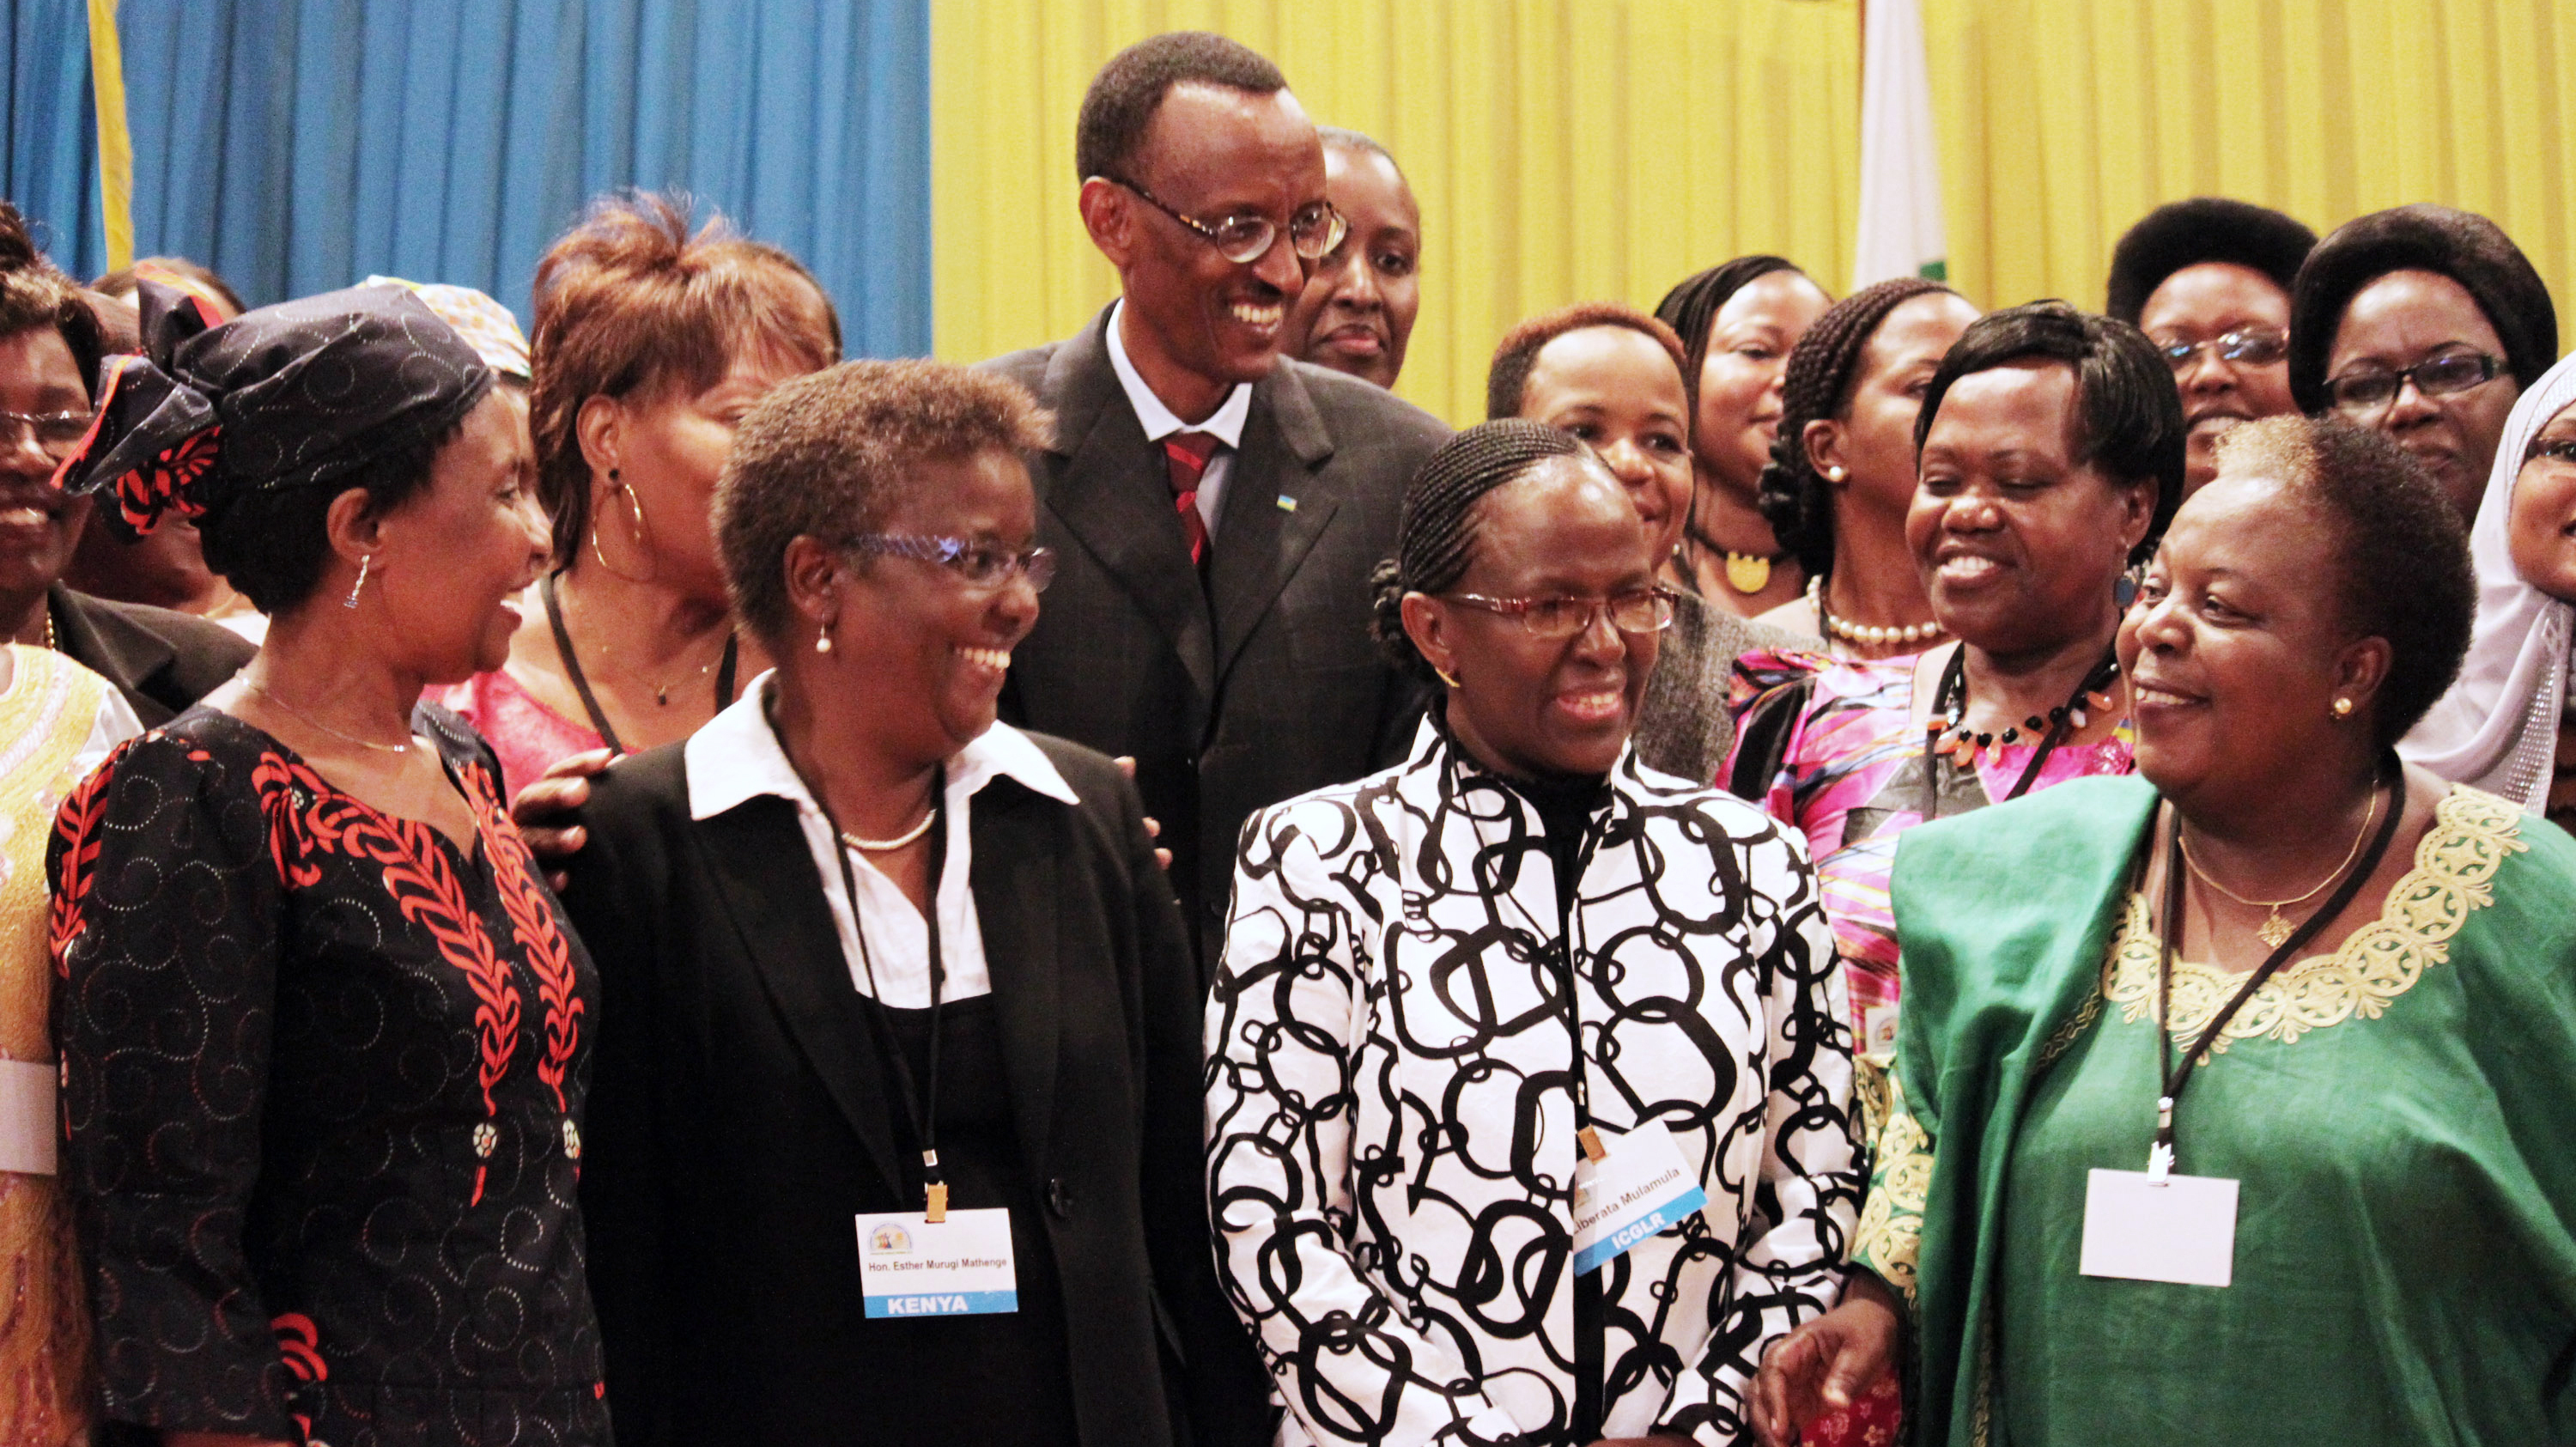 Rwandan President Paul Kagame takes part in a conference on the role of women at the nation's Parliament in the capital, Kigali, in 2010. Women in Rwanda account for 64 percent of the lower house of Parliament -- a higher percentage than in any other country.